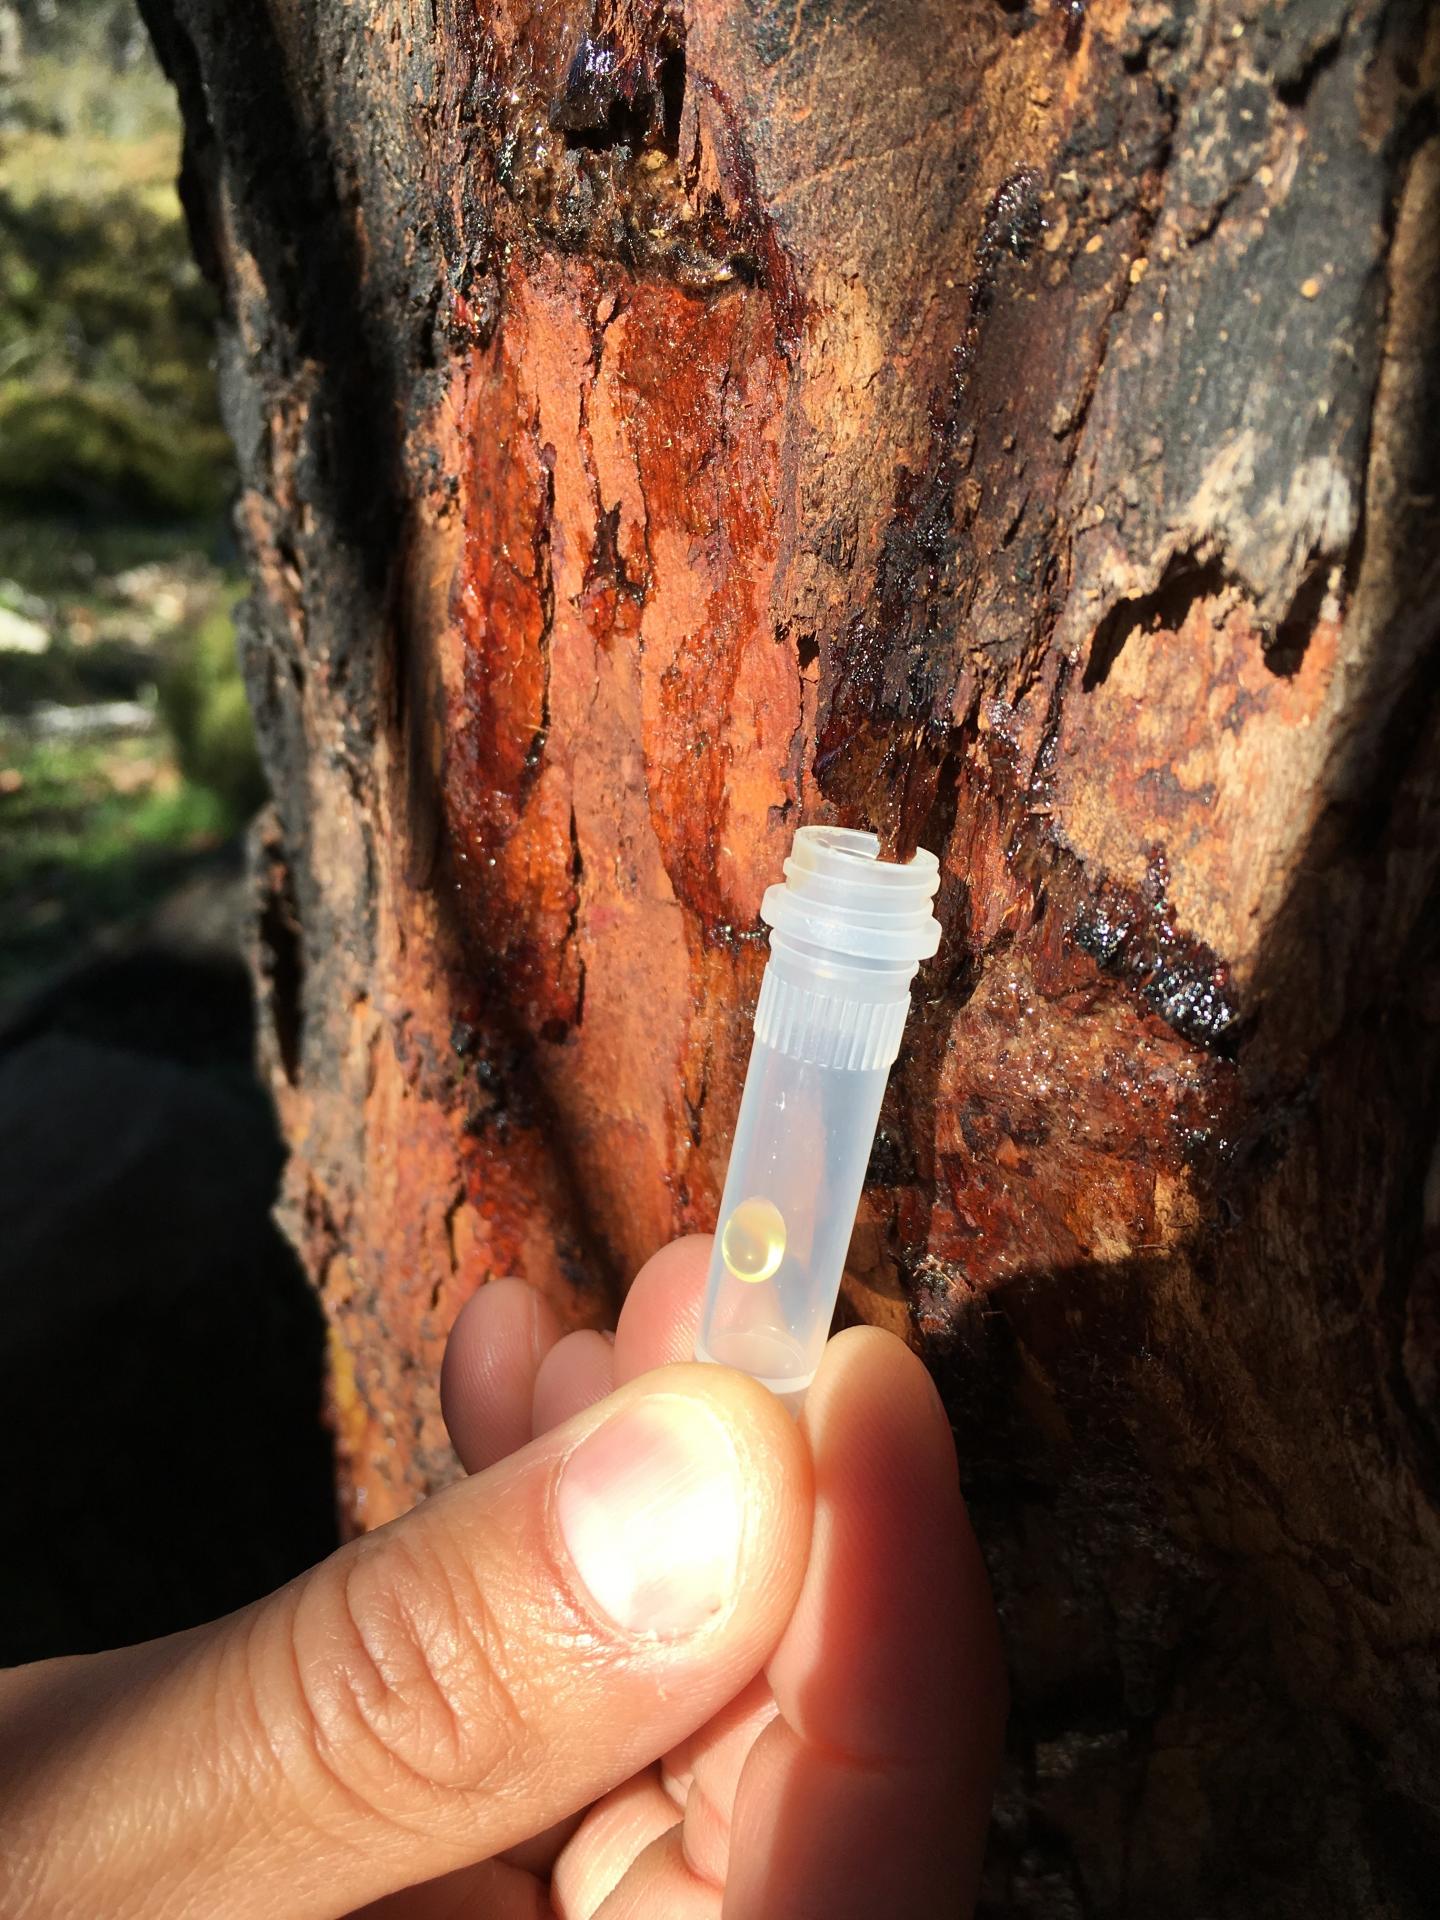 Collecting Sap Samples from the Cider Gum